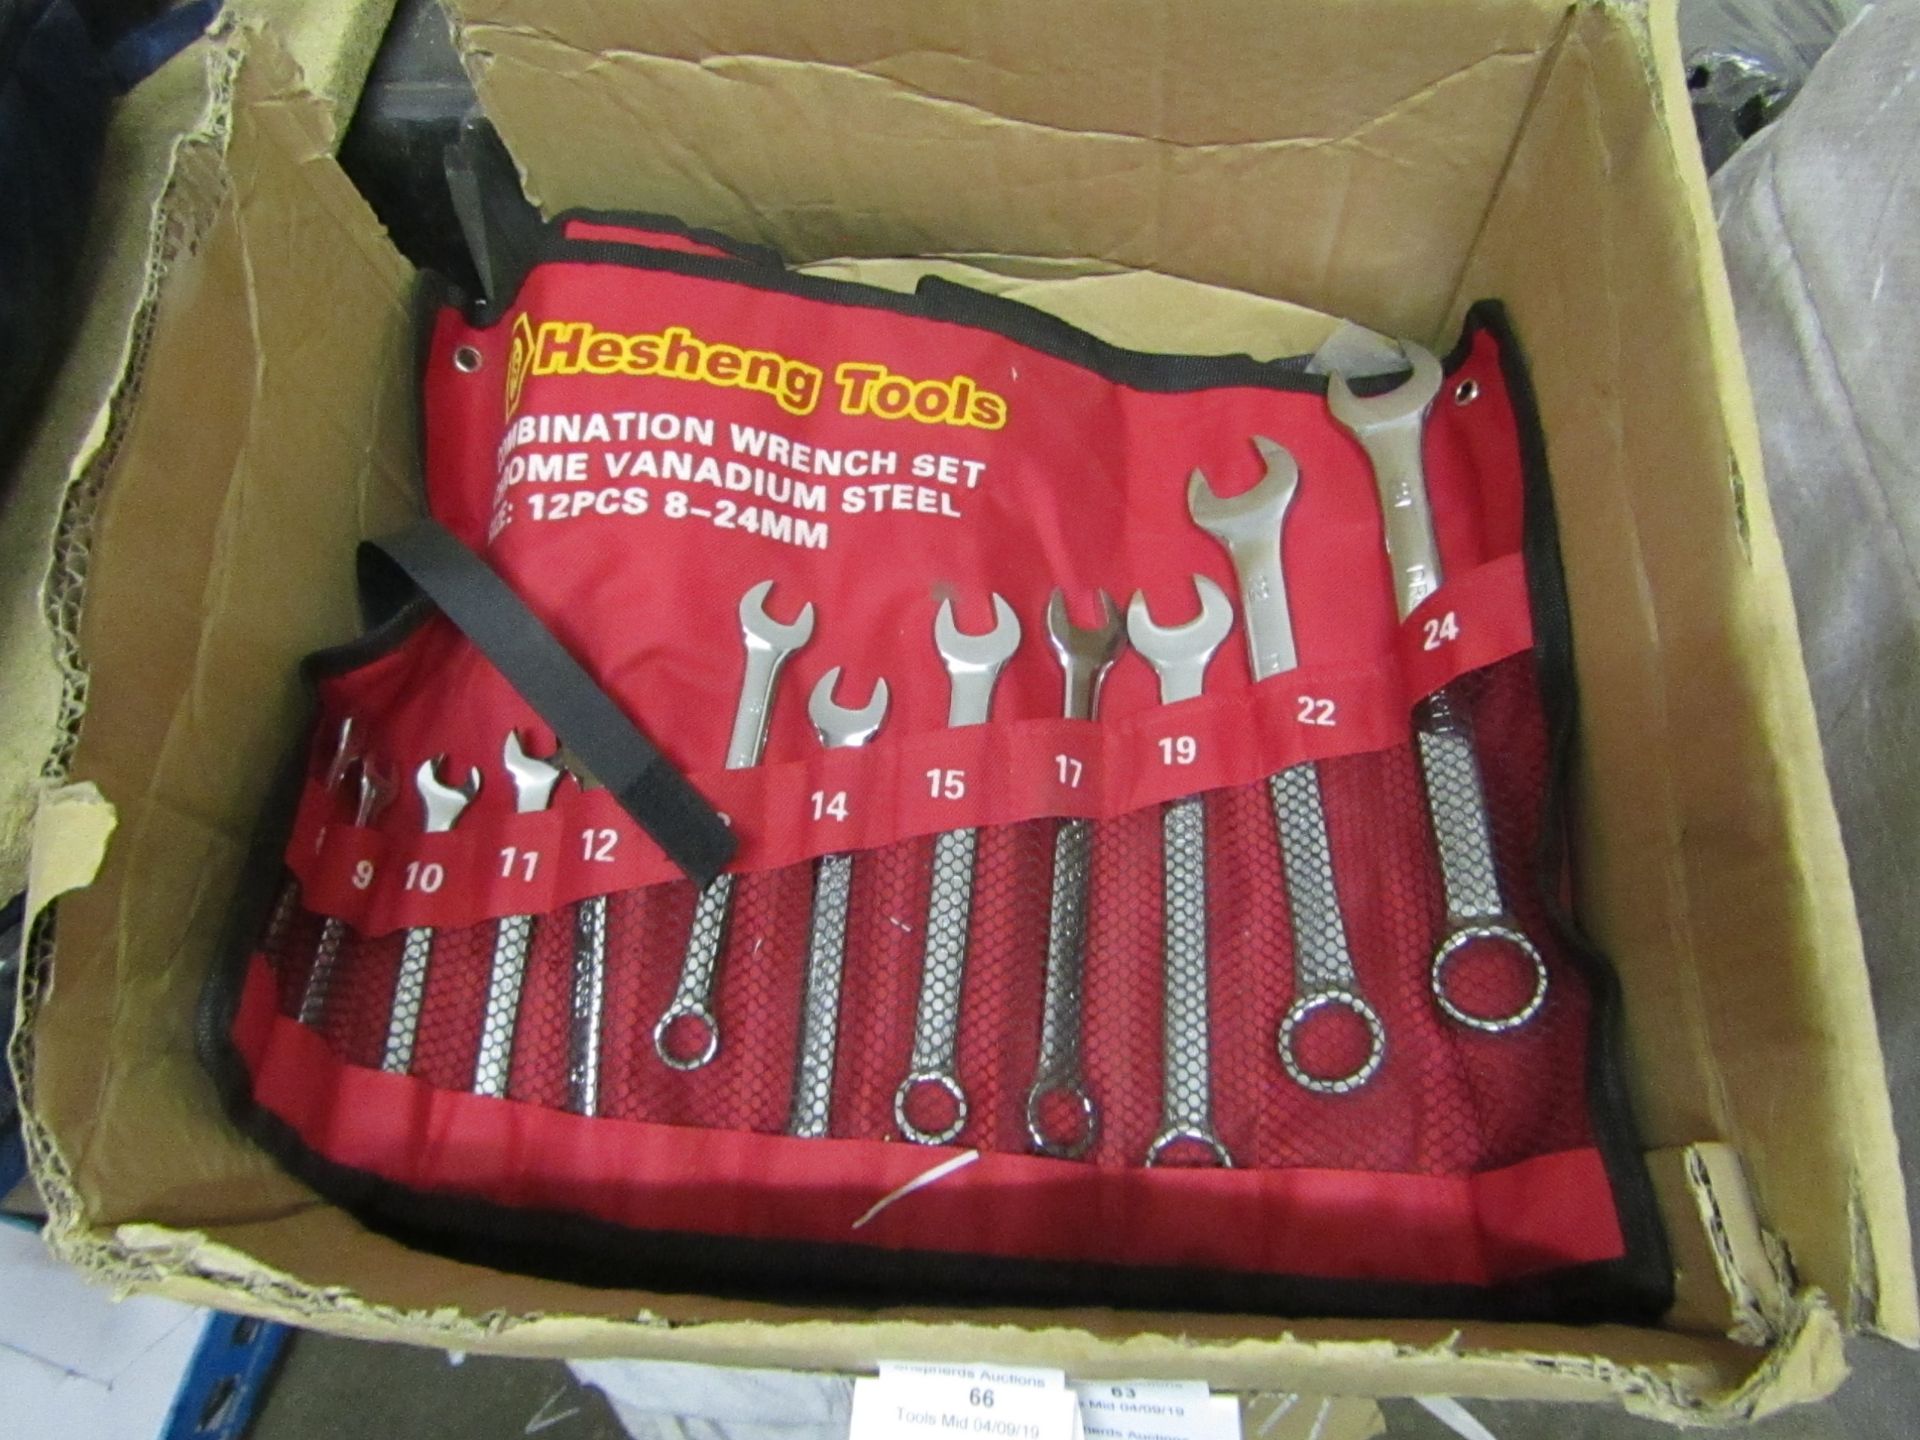 Heshang Tools 12 piece combination wrench set, new in carry roll.